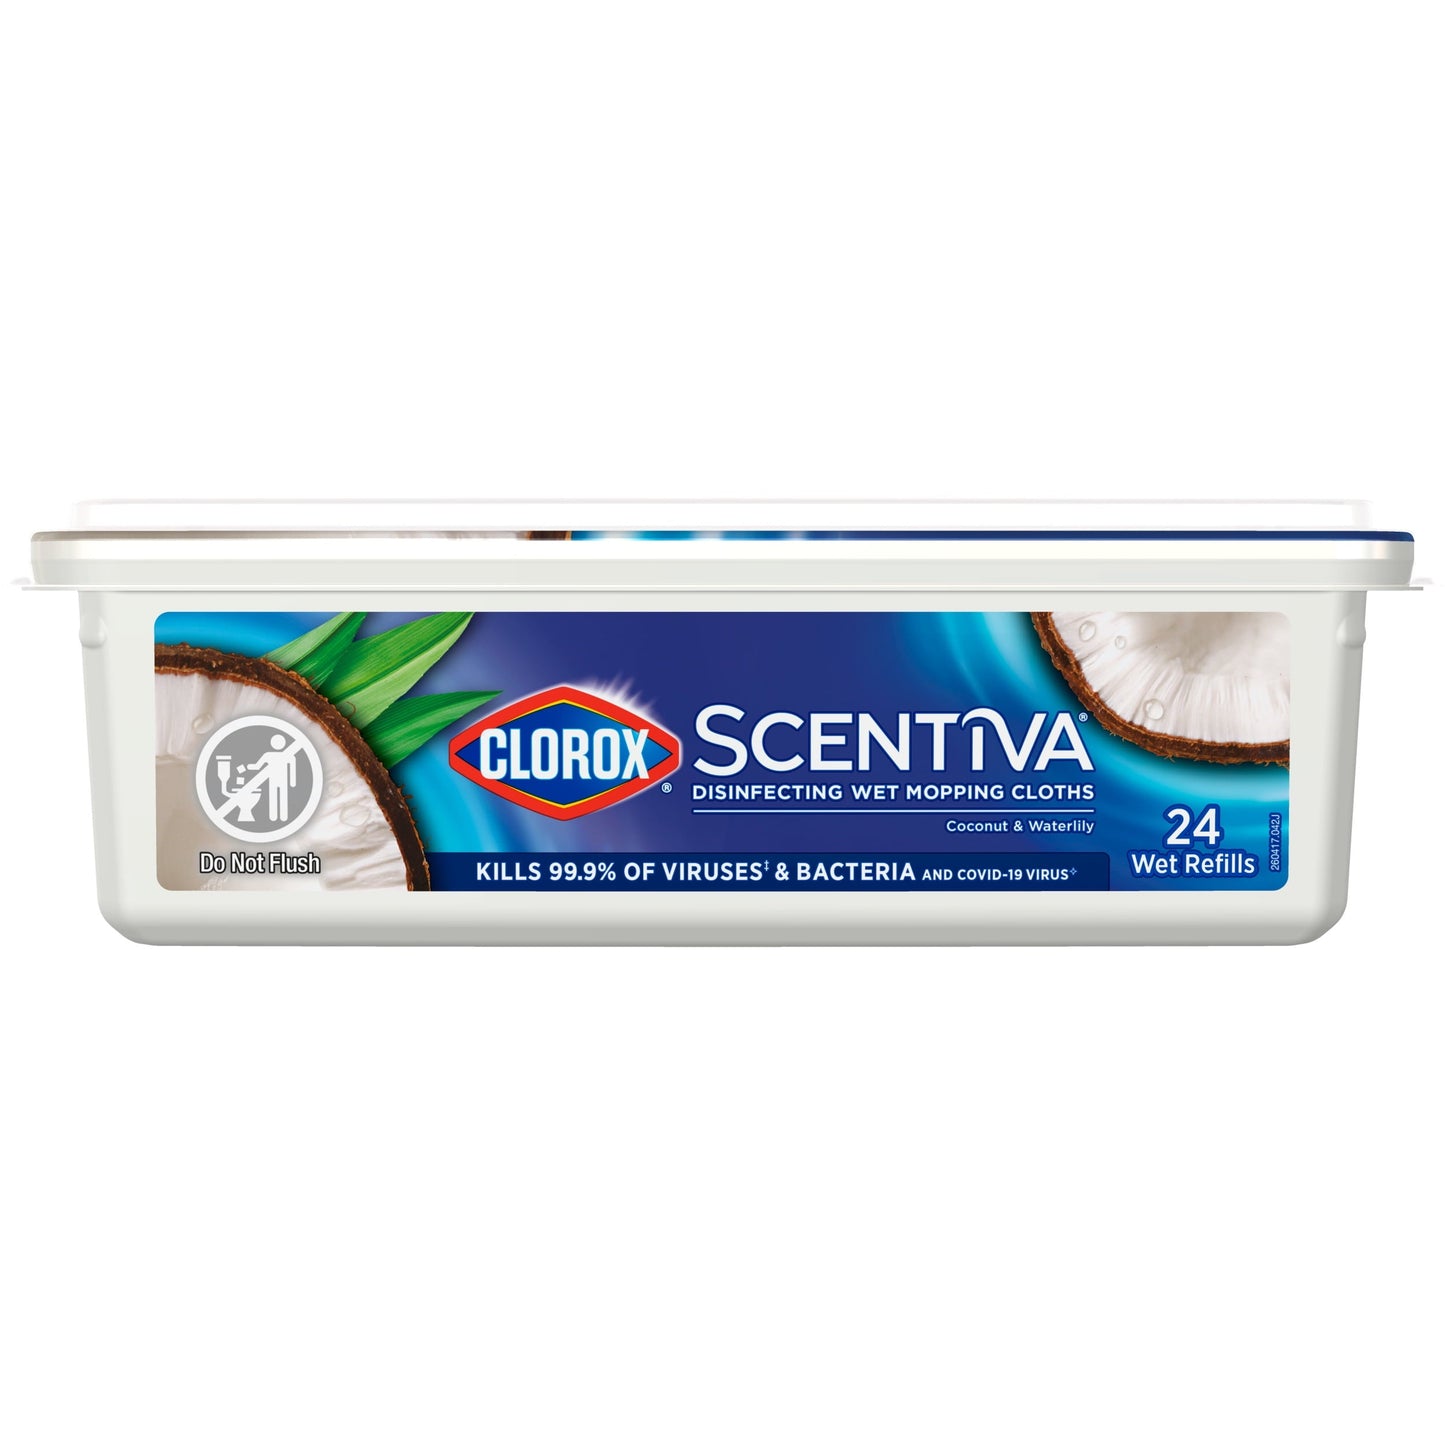 Clorox Scentiva Disinfecting Wet Mop Pads, Coconut & Waterlily, 24 Count